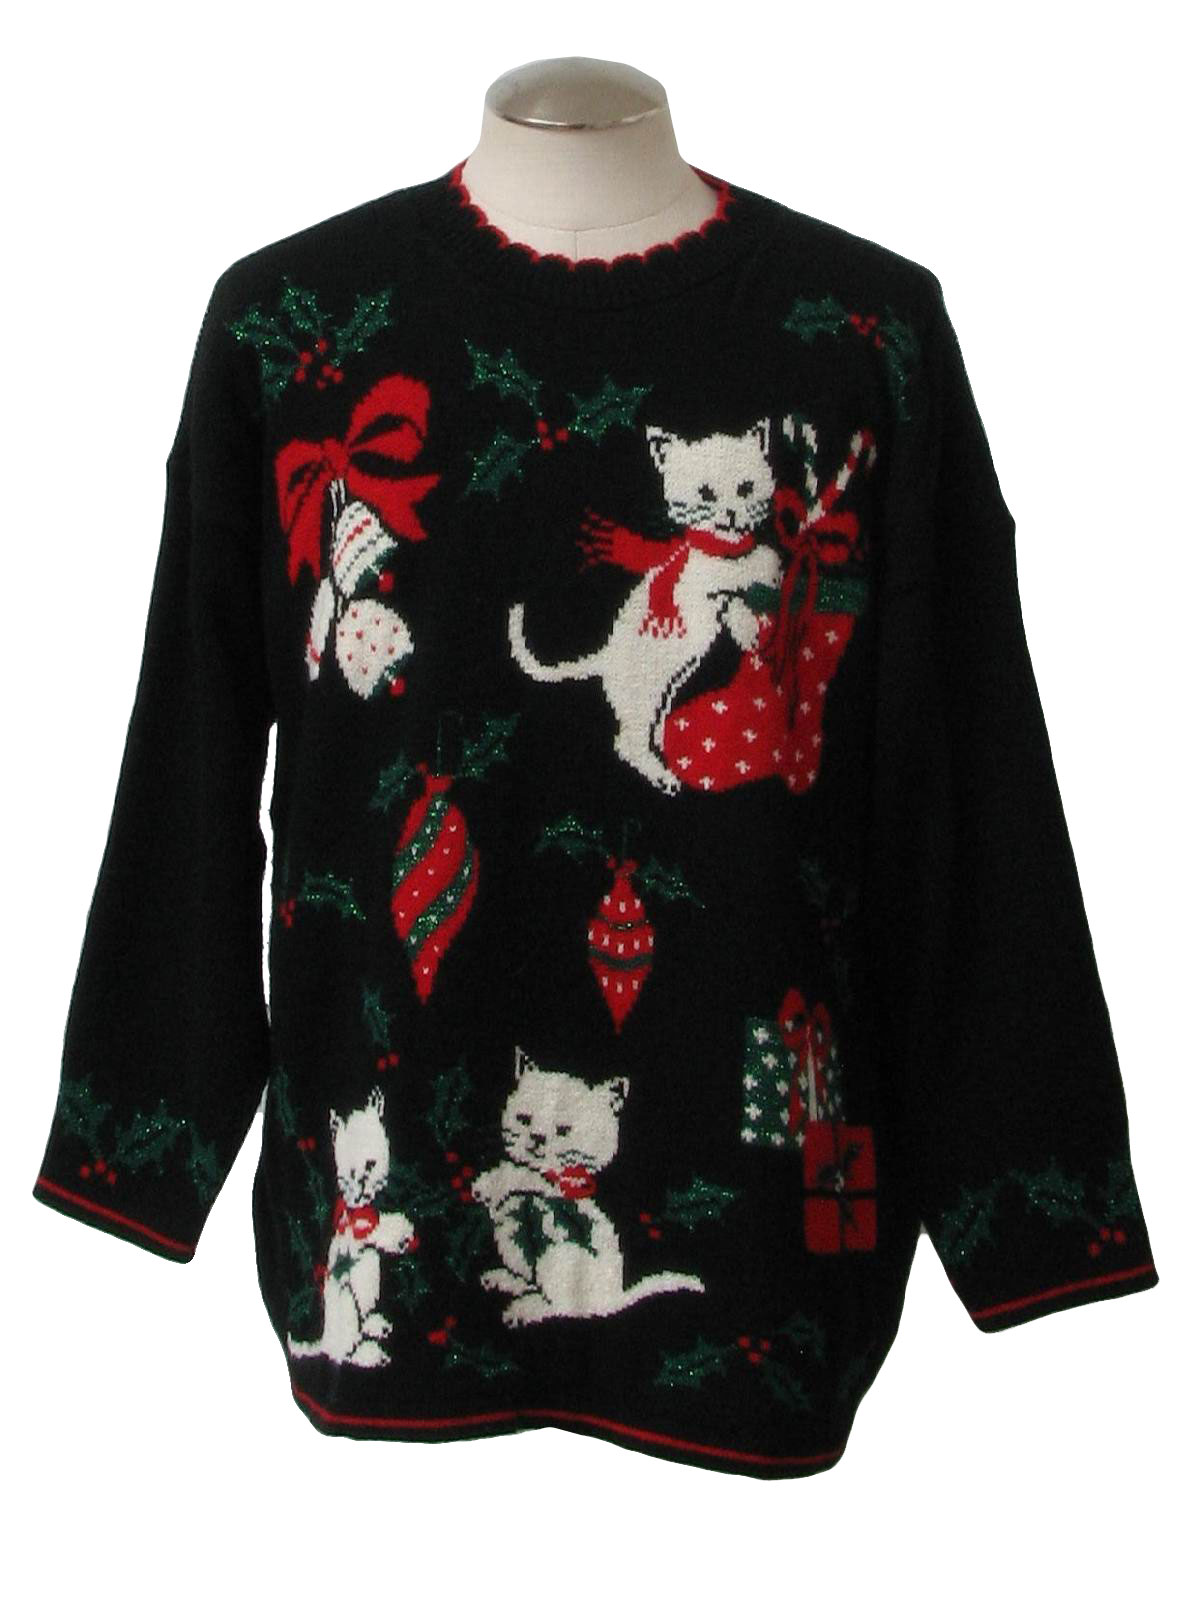 Eighties Adele Cat-Tastic Ugly Christmas Sweater: 80s authentic